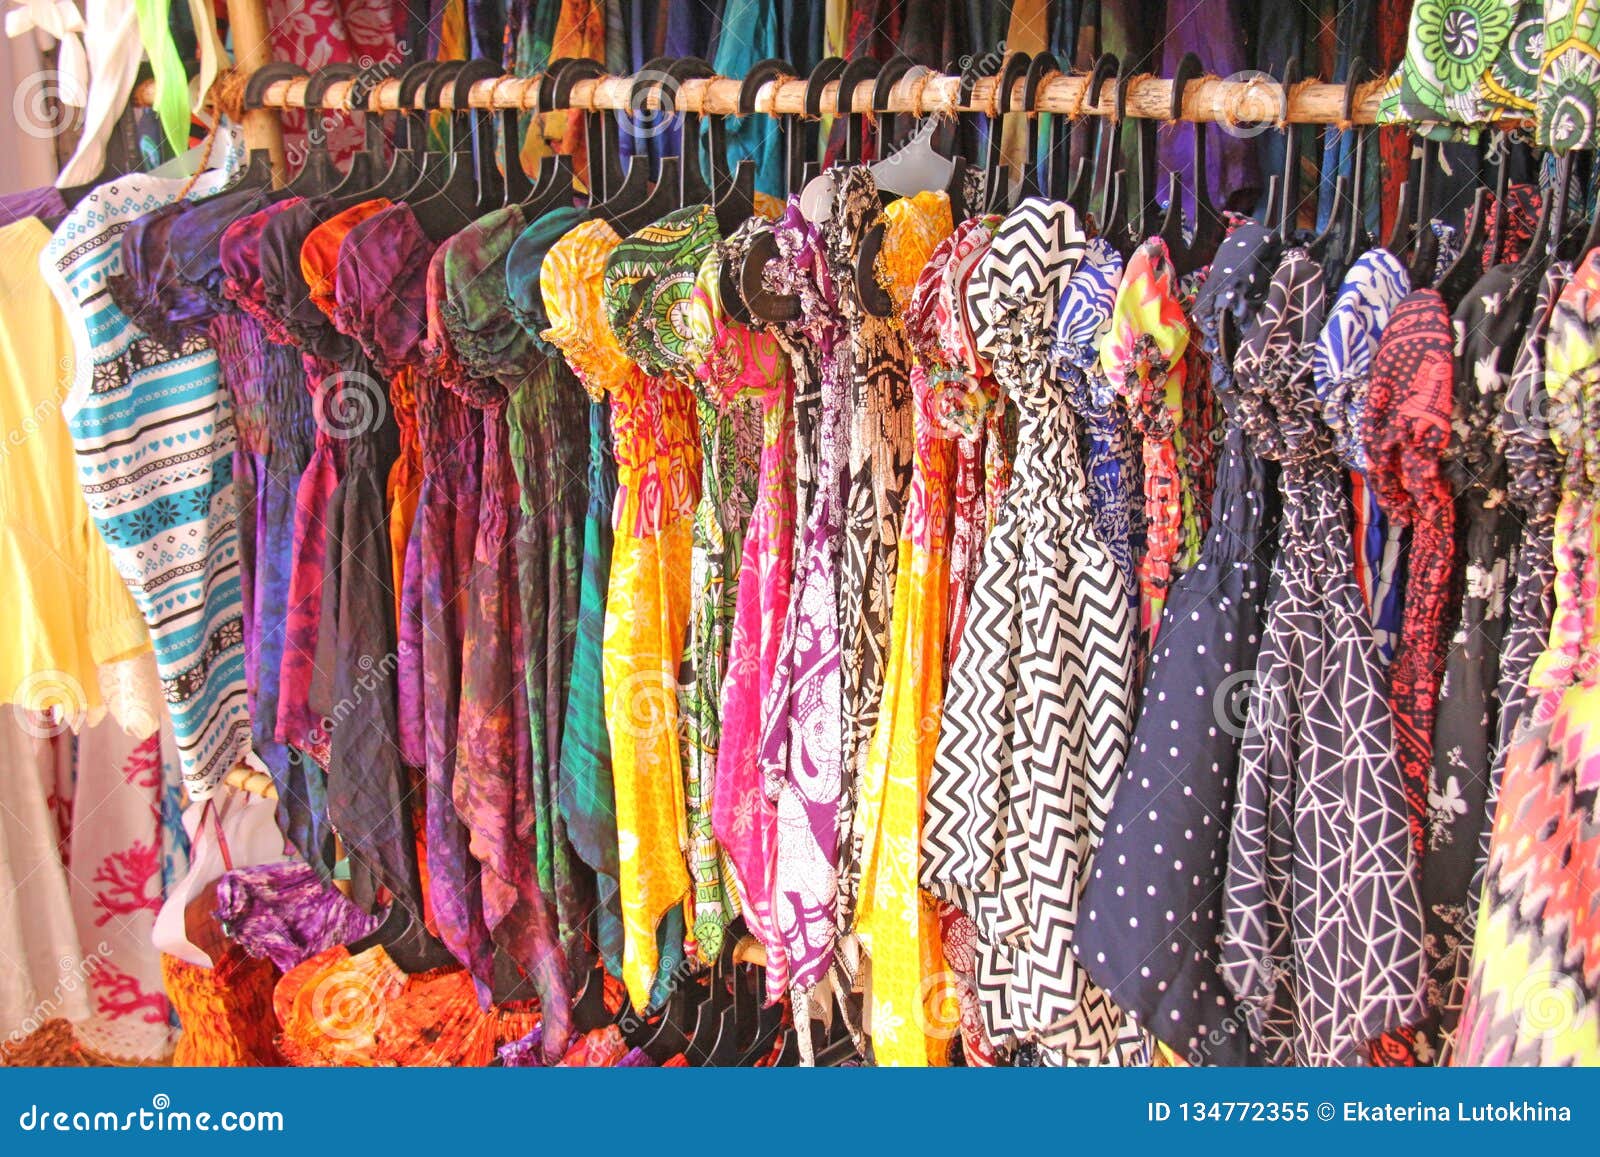 Bright Colored Children`s Dresses or Sarafans Hang on Hangers and are ...